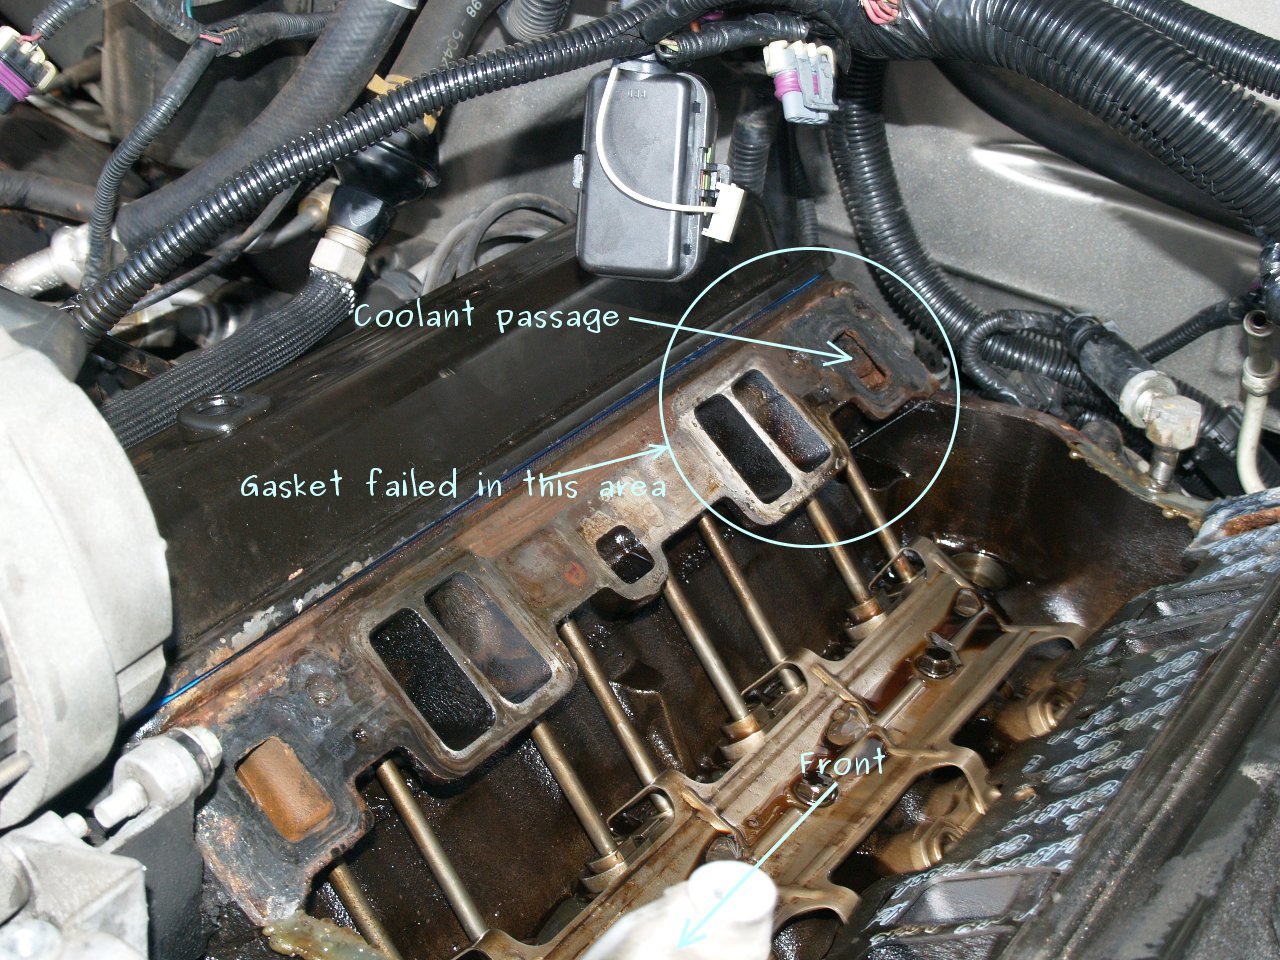 See P393C in engine